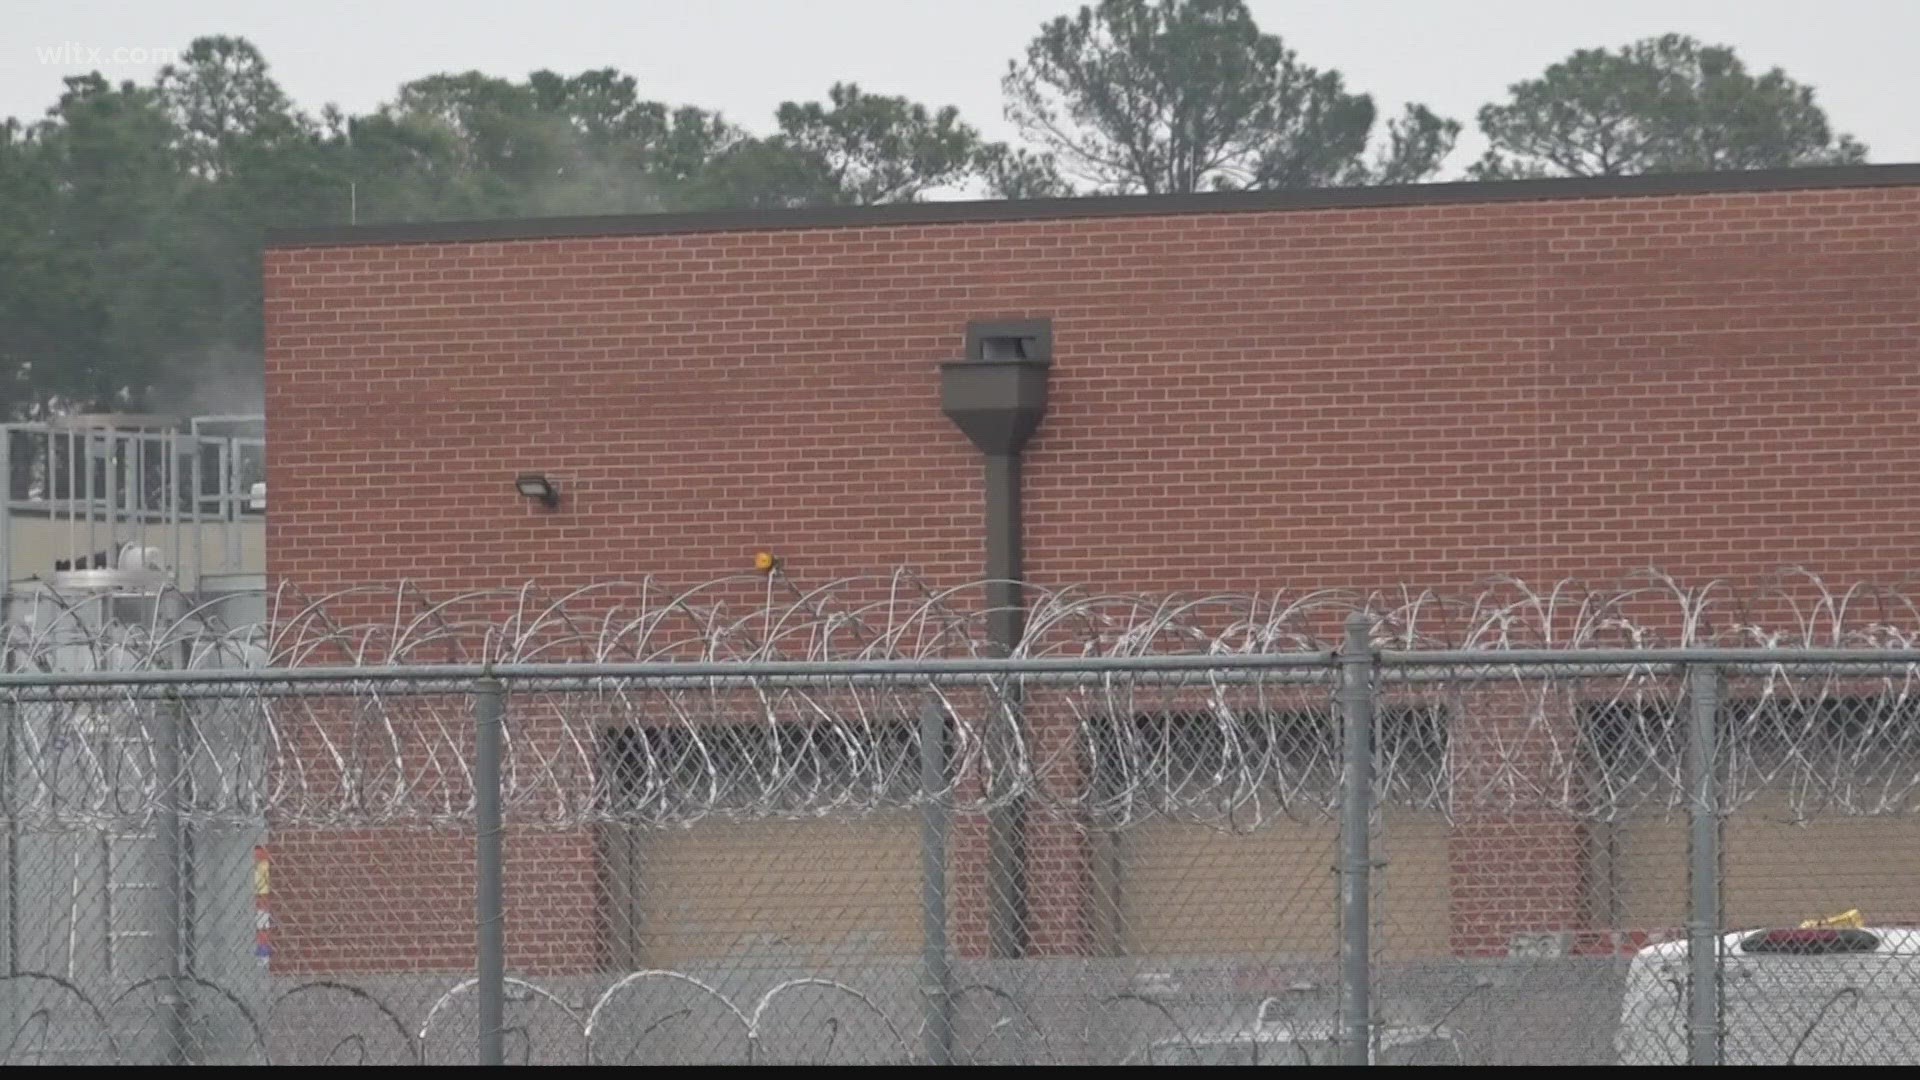 n employee at the Alvin S. Glenn Detention Center is being accused of taking money from a detainee at the jail